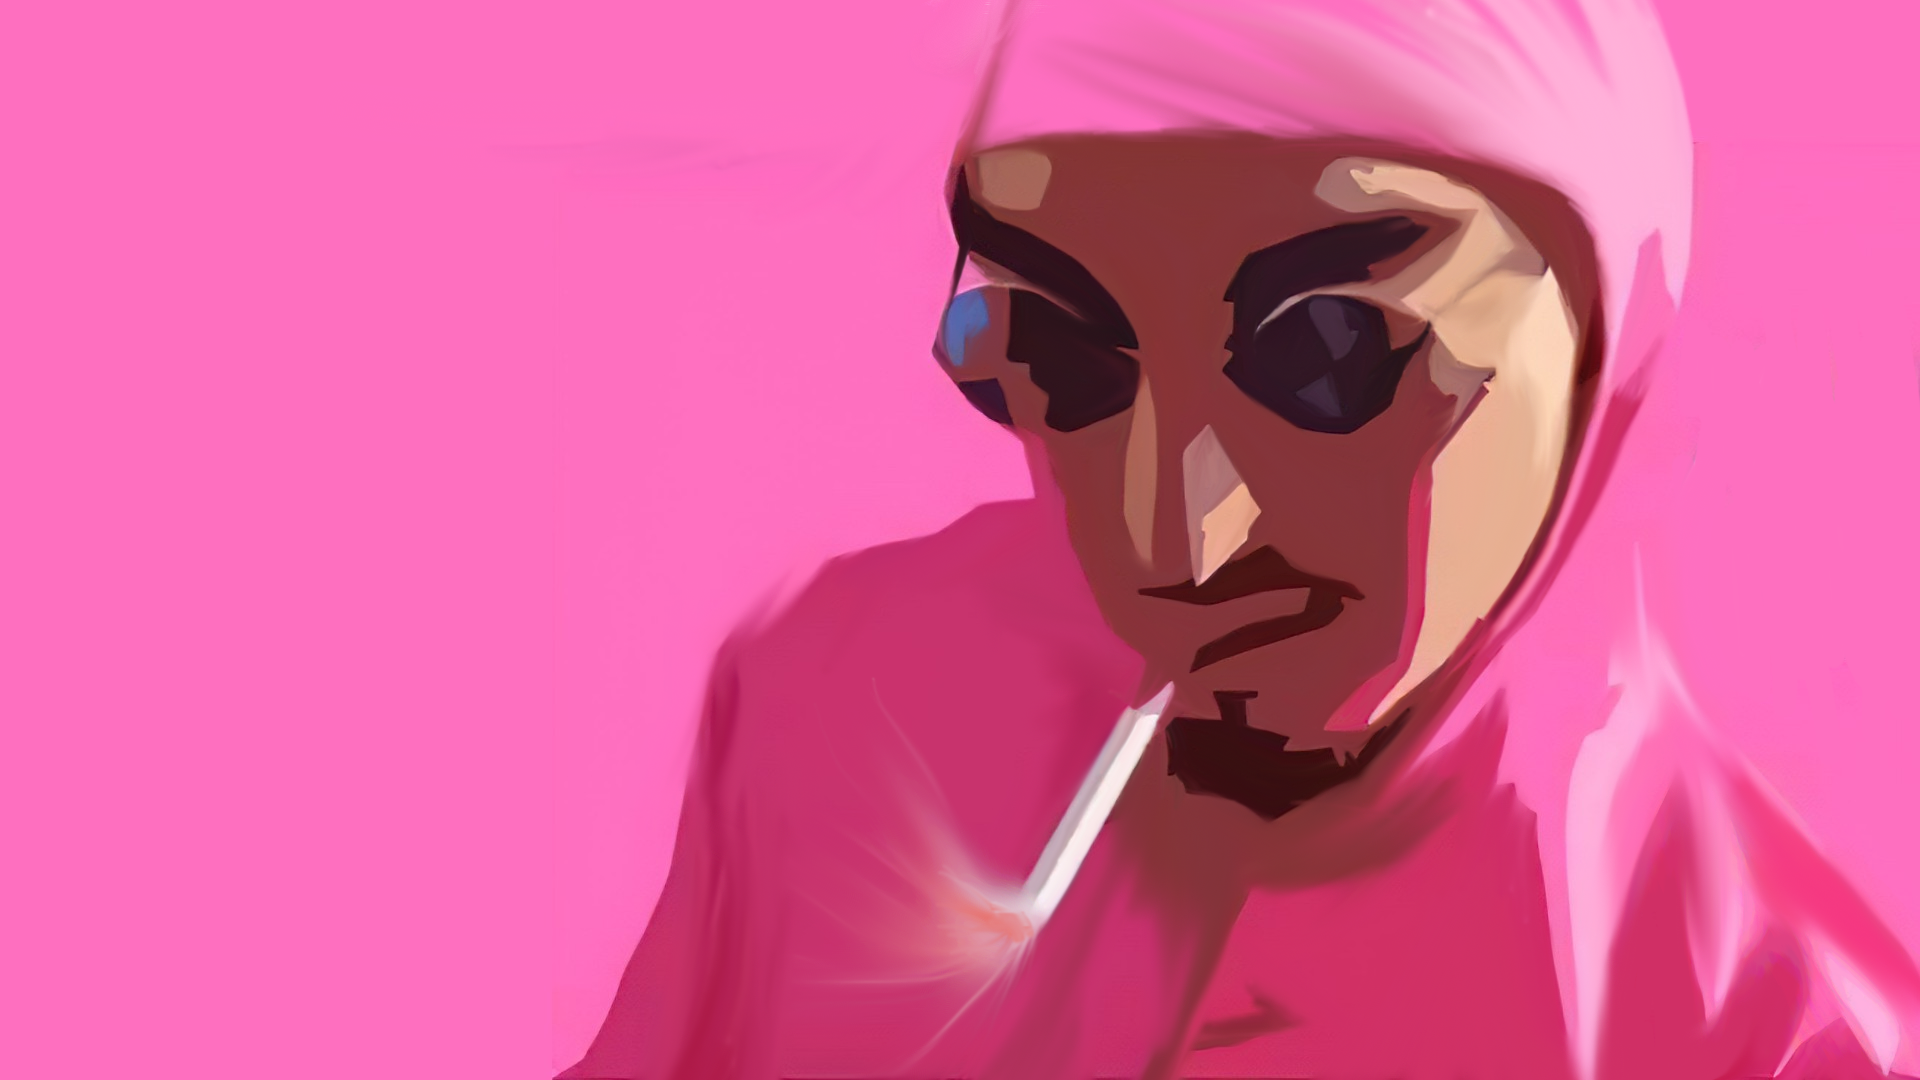 Pink Guy Smoking Cigarette by Dthlives